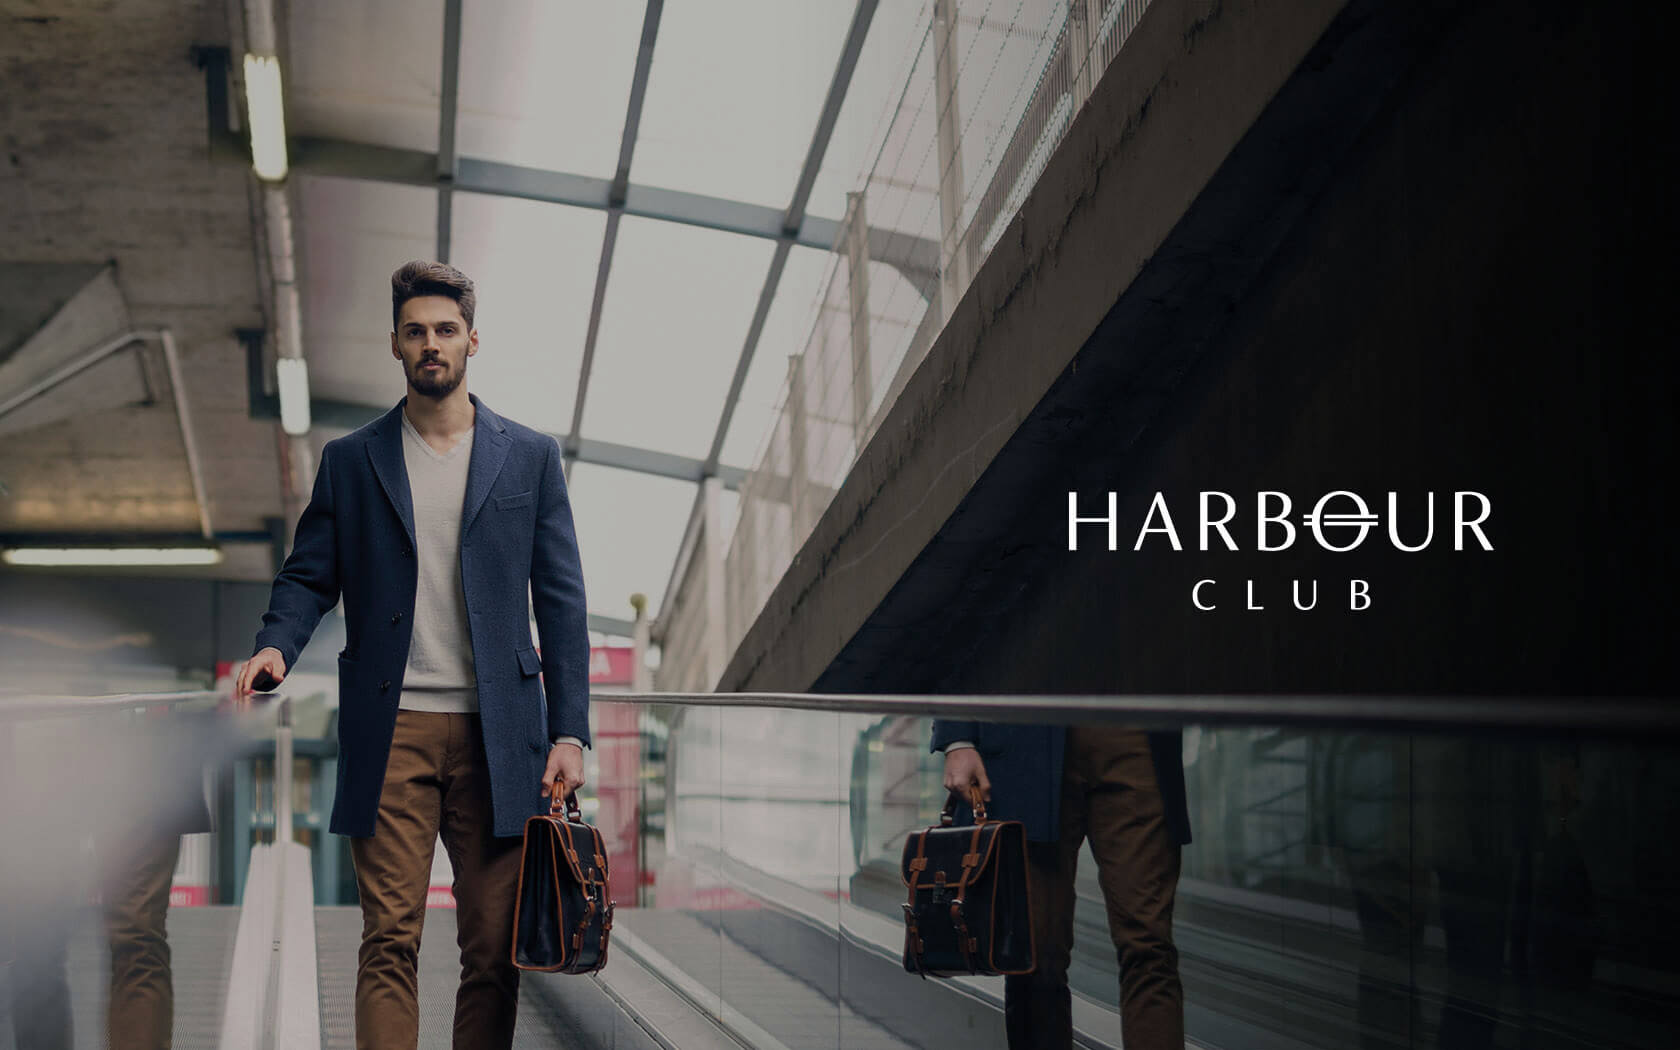 Harbour Club. Brand logo in white